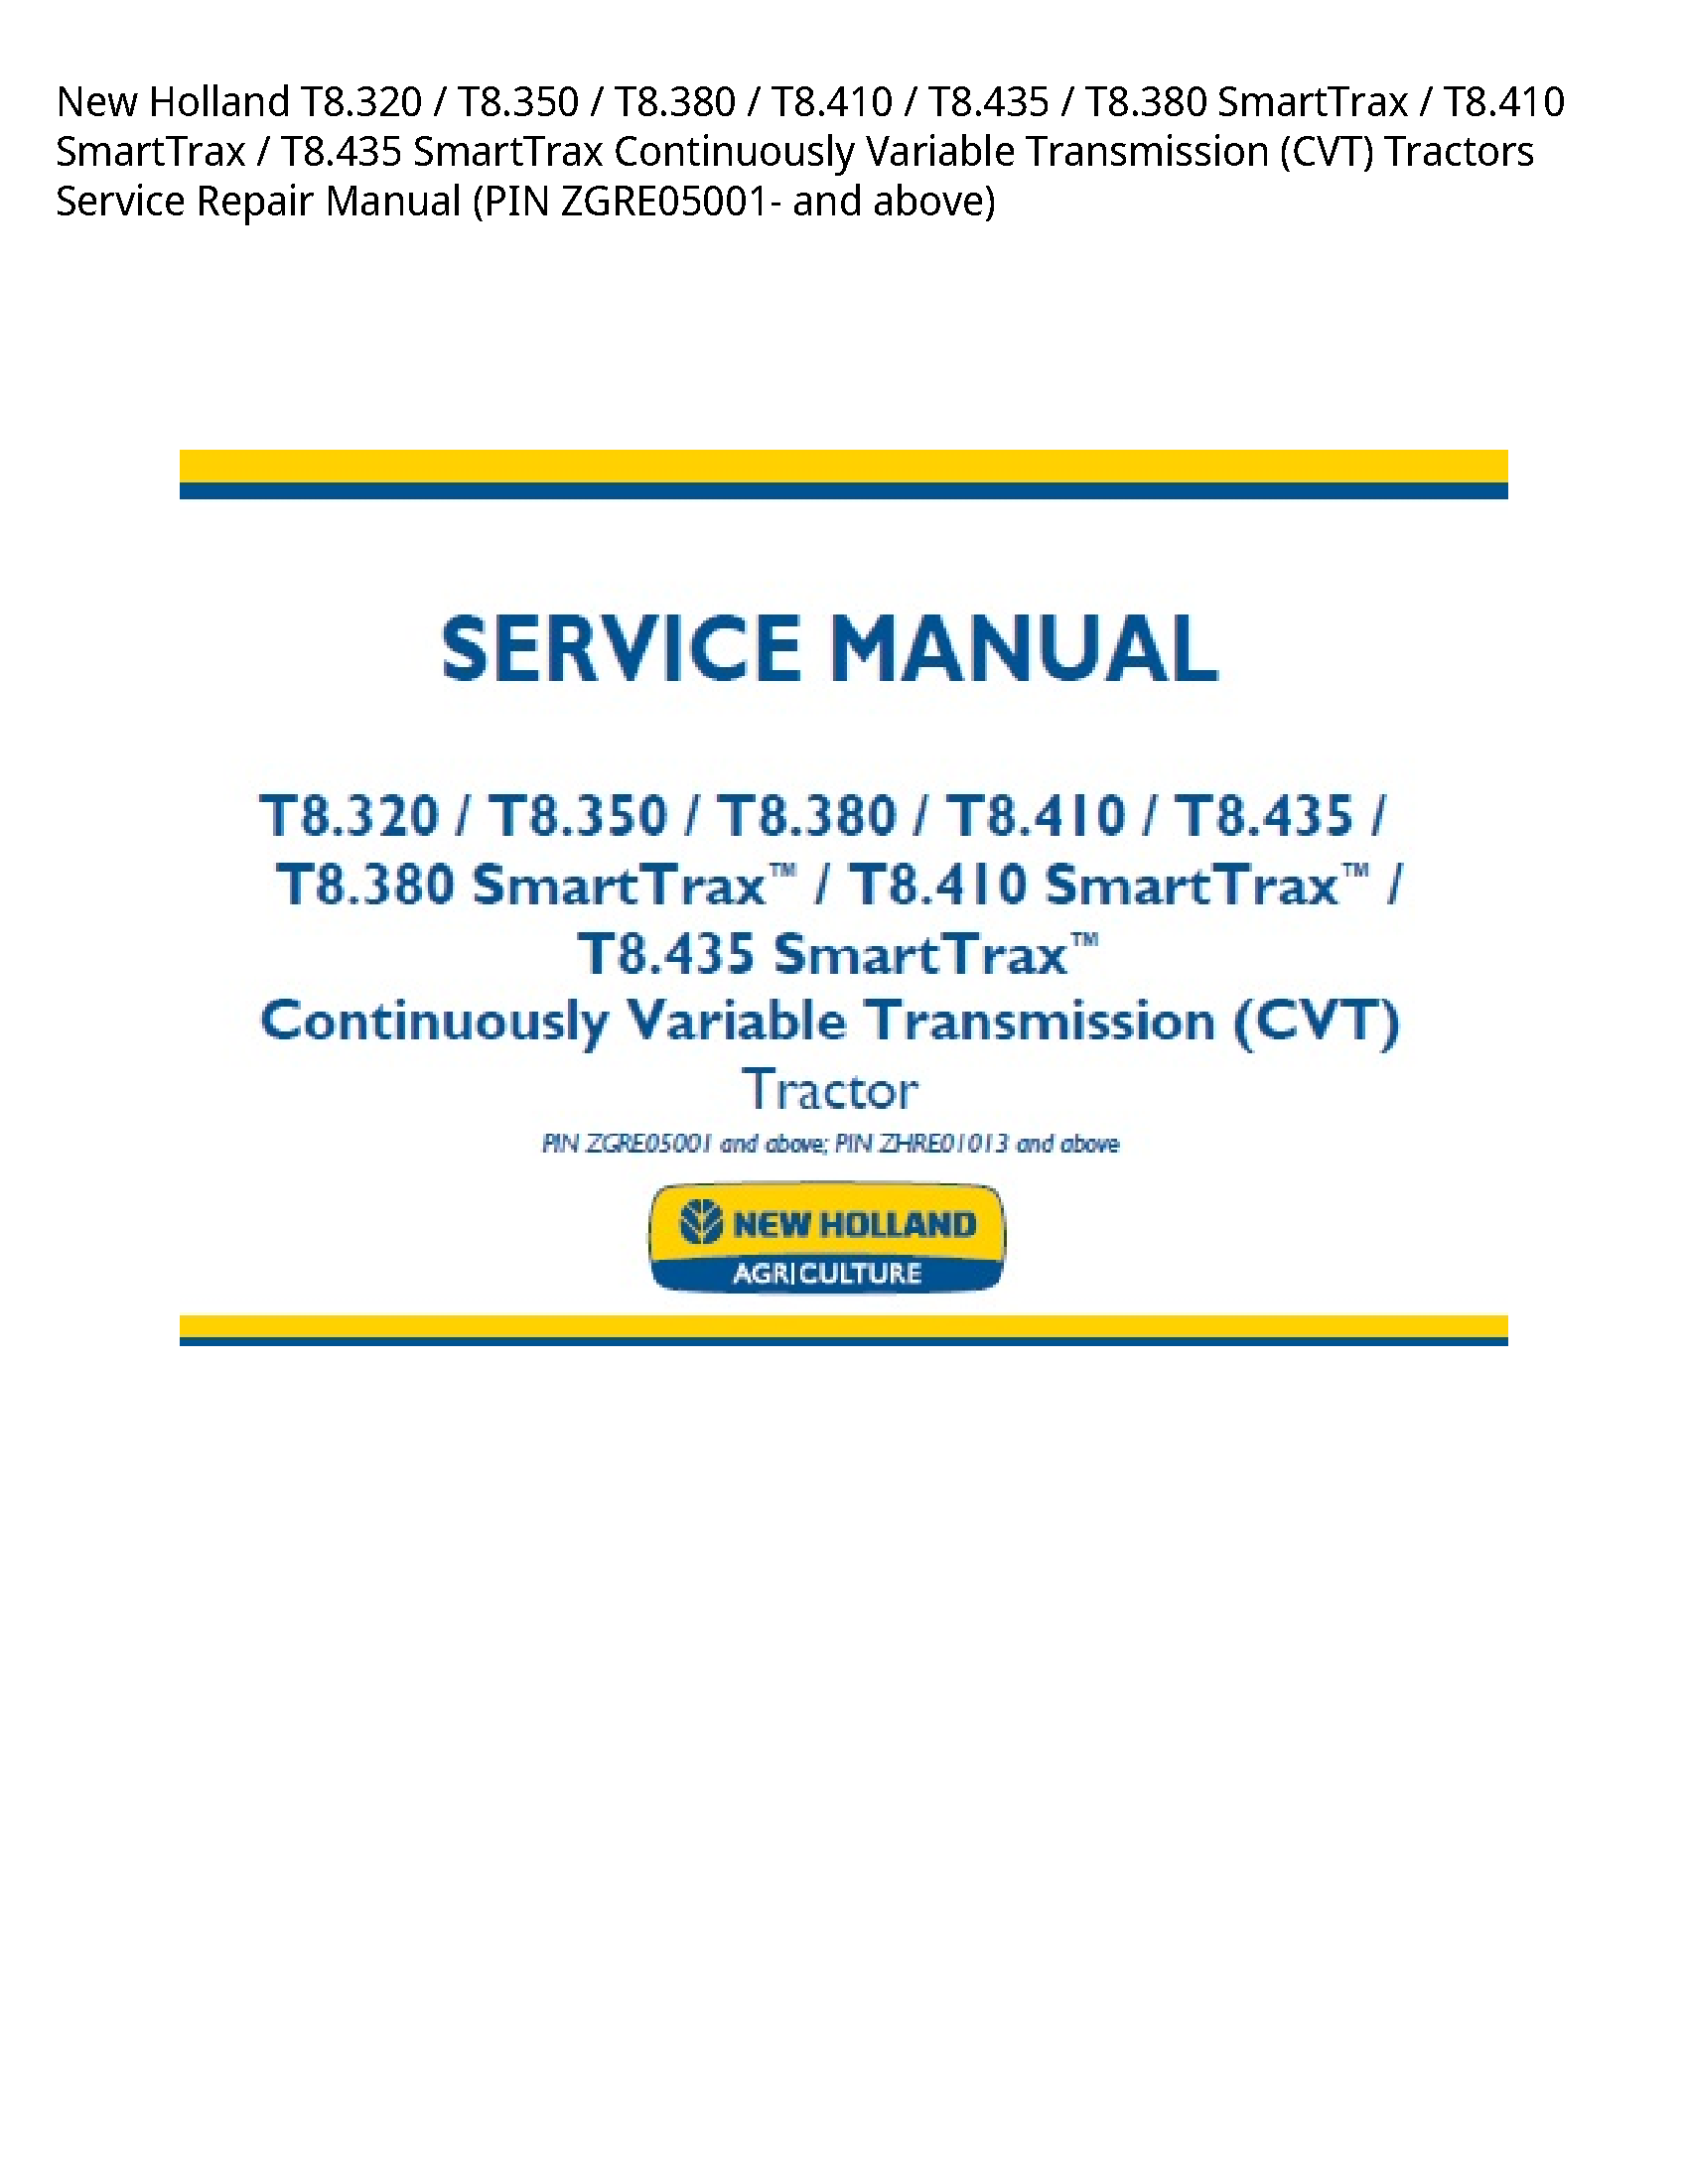 New Holland T8.320 SmartTrax SmartTrax SmartTrax Continuously Variable Transmission (CVT) Tractors manual